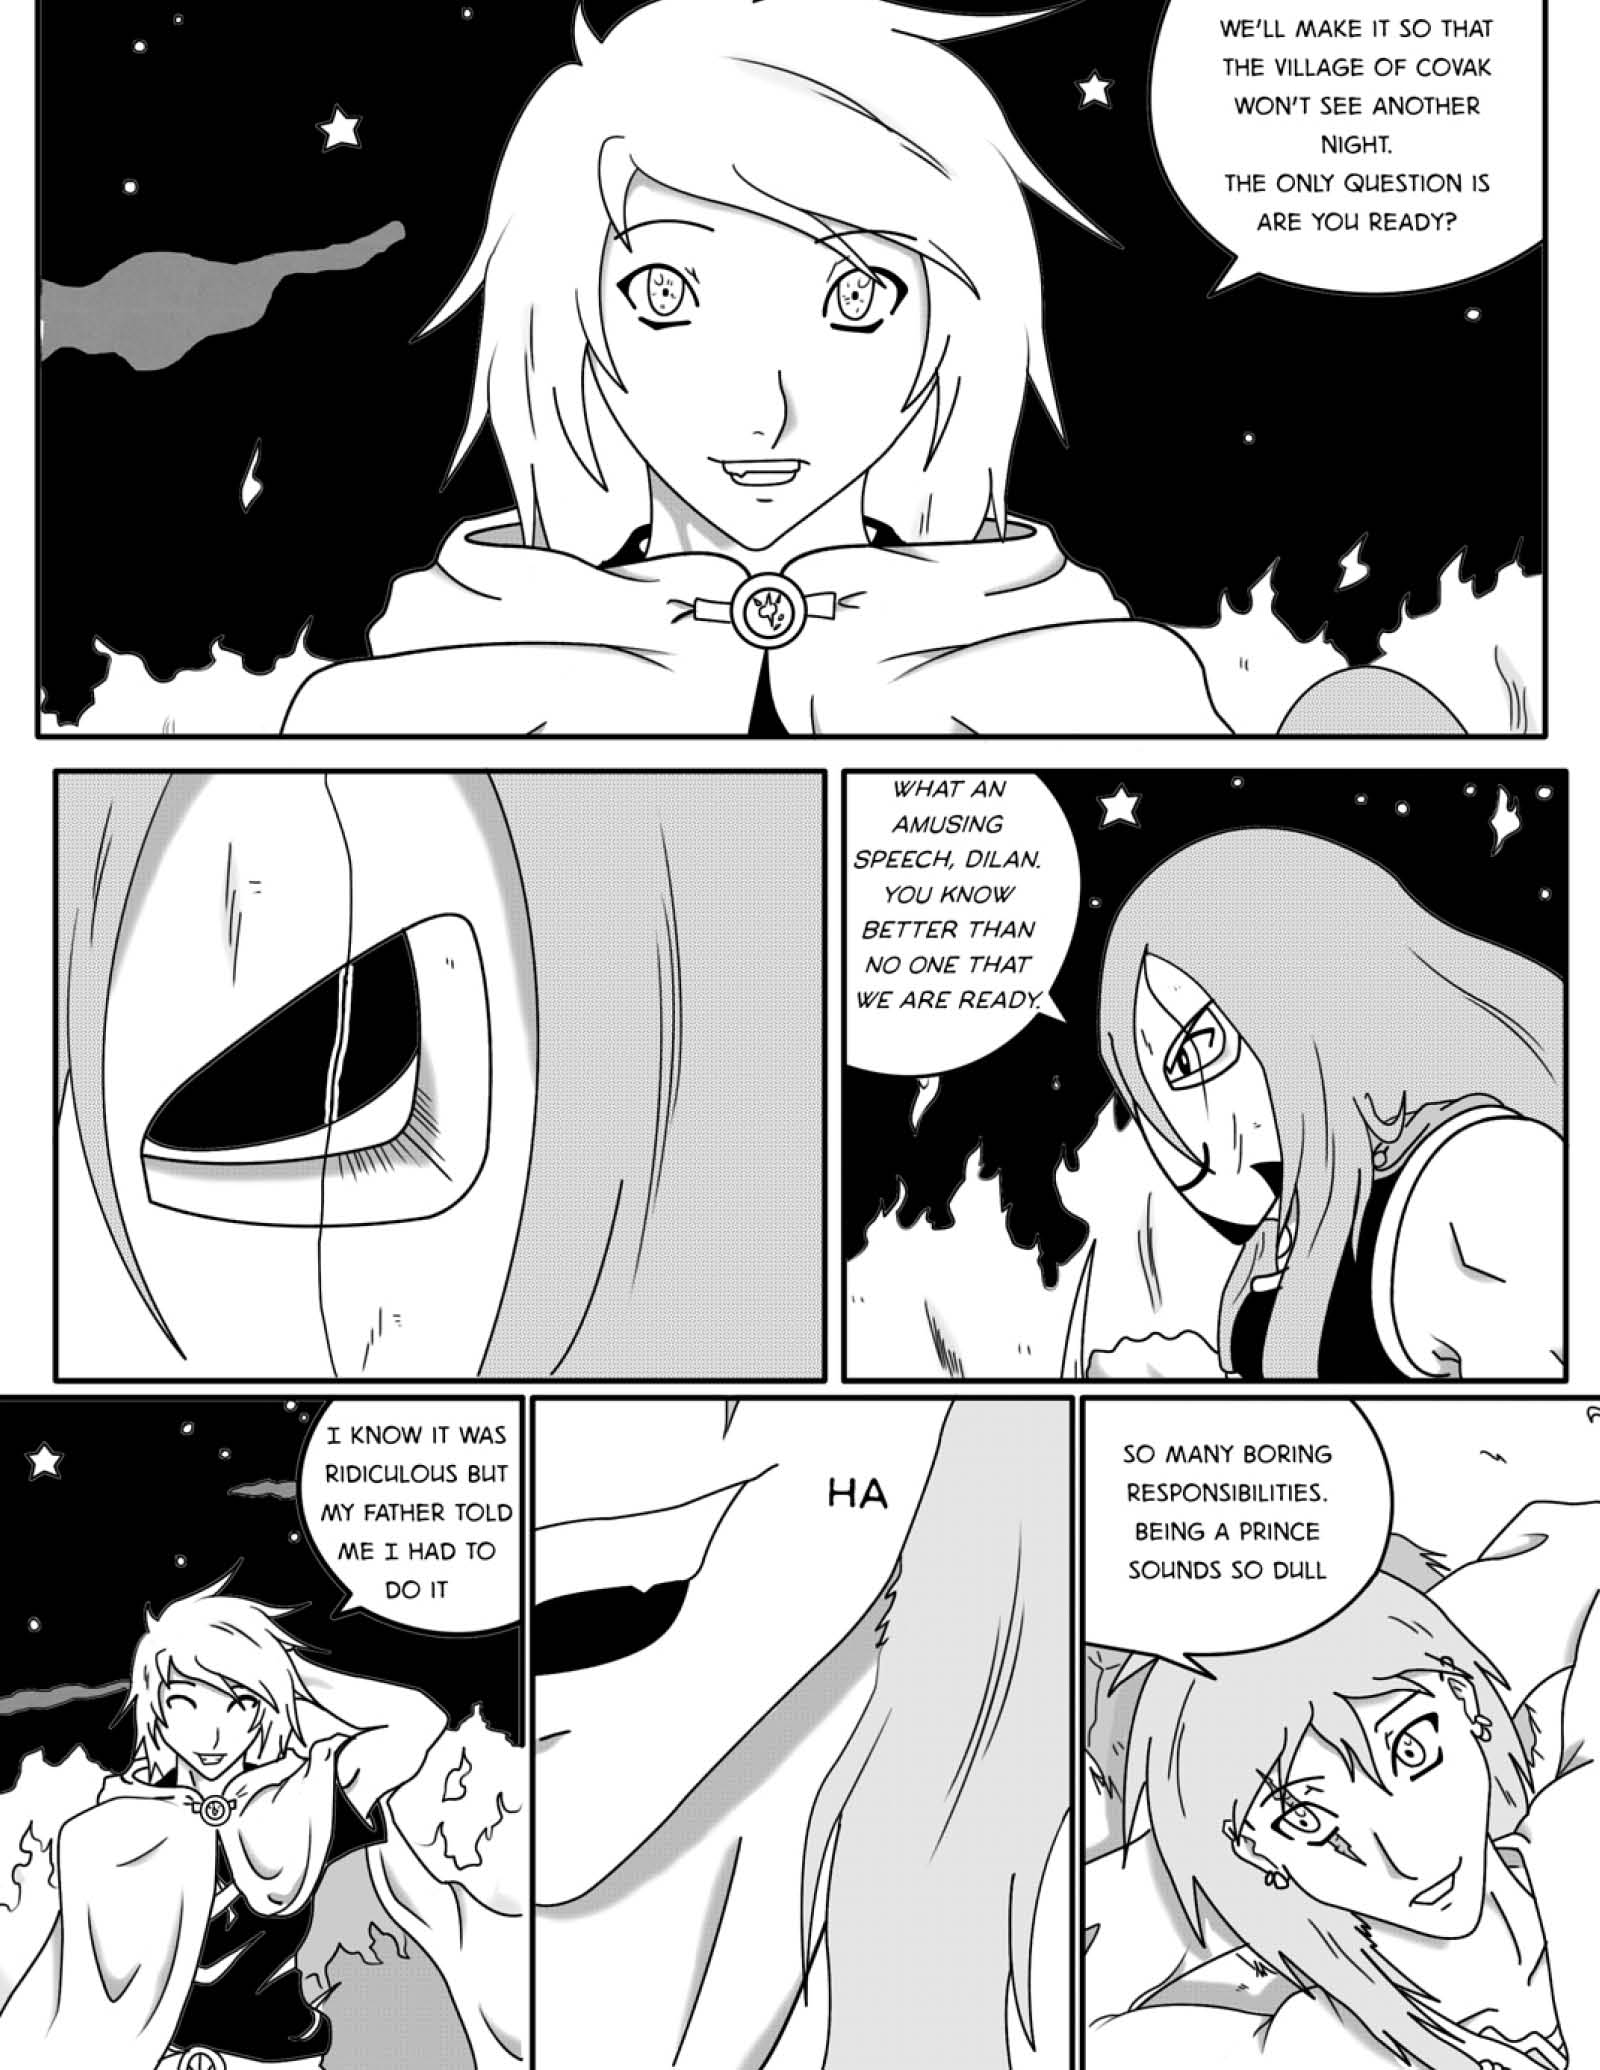 Series Dilan: the Chronicles of Covak - Chapter 1 - Page 24 - Language ENG